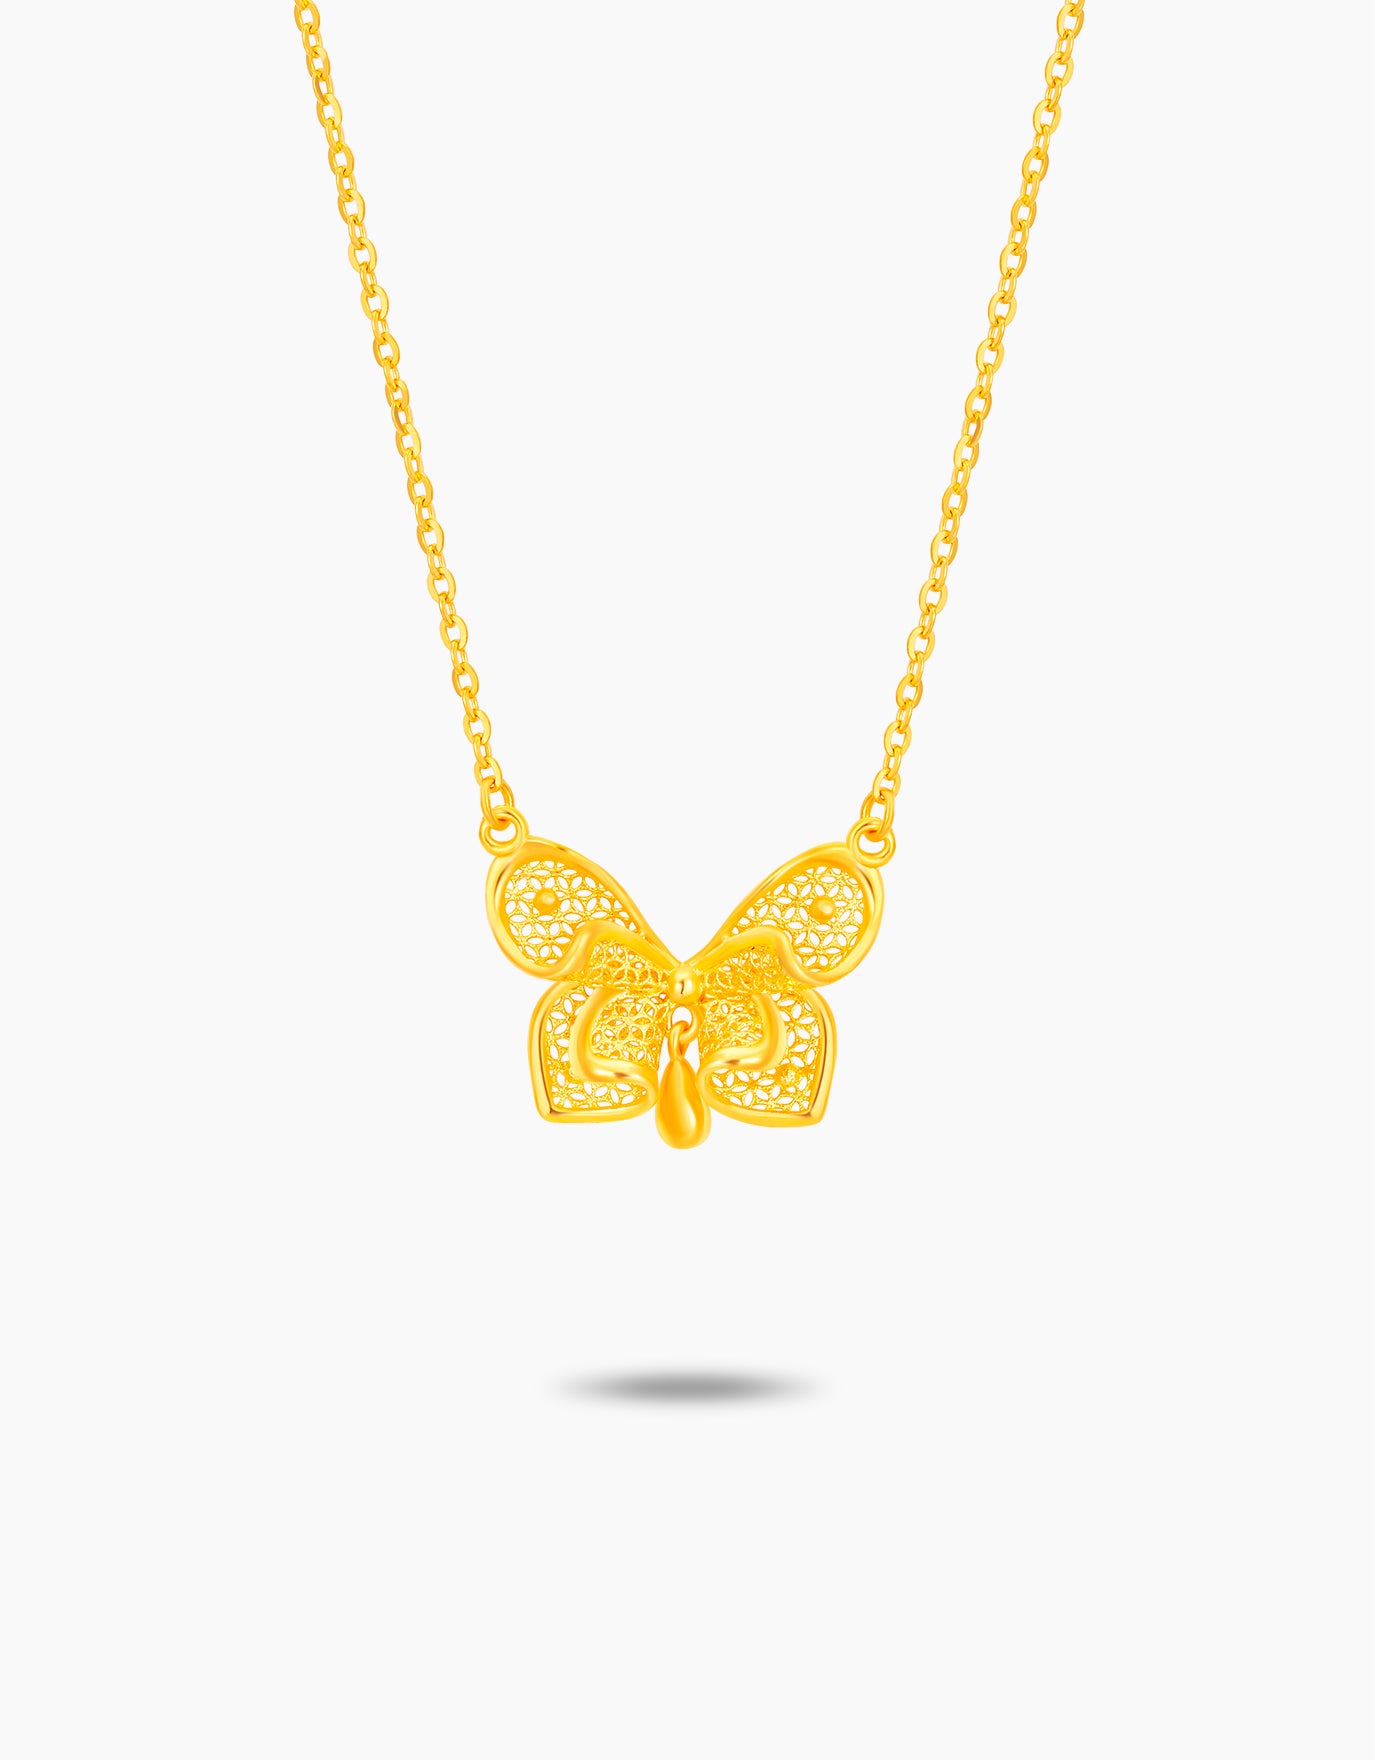 LVC 9IN Blossom Bow 999 Gold Necklace